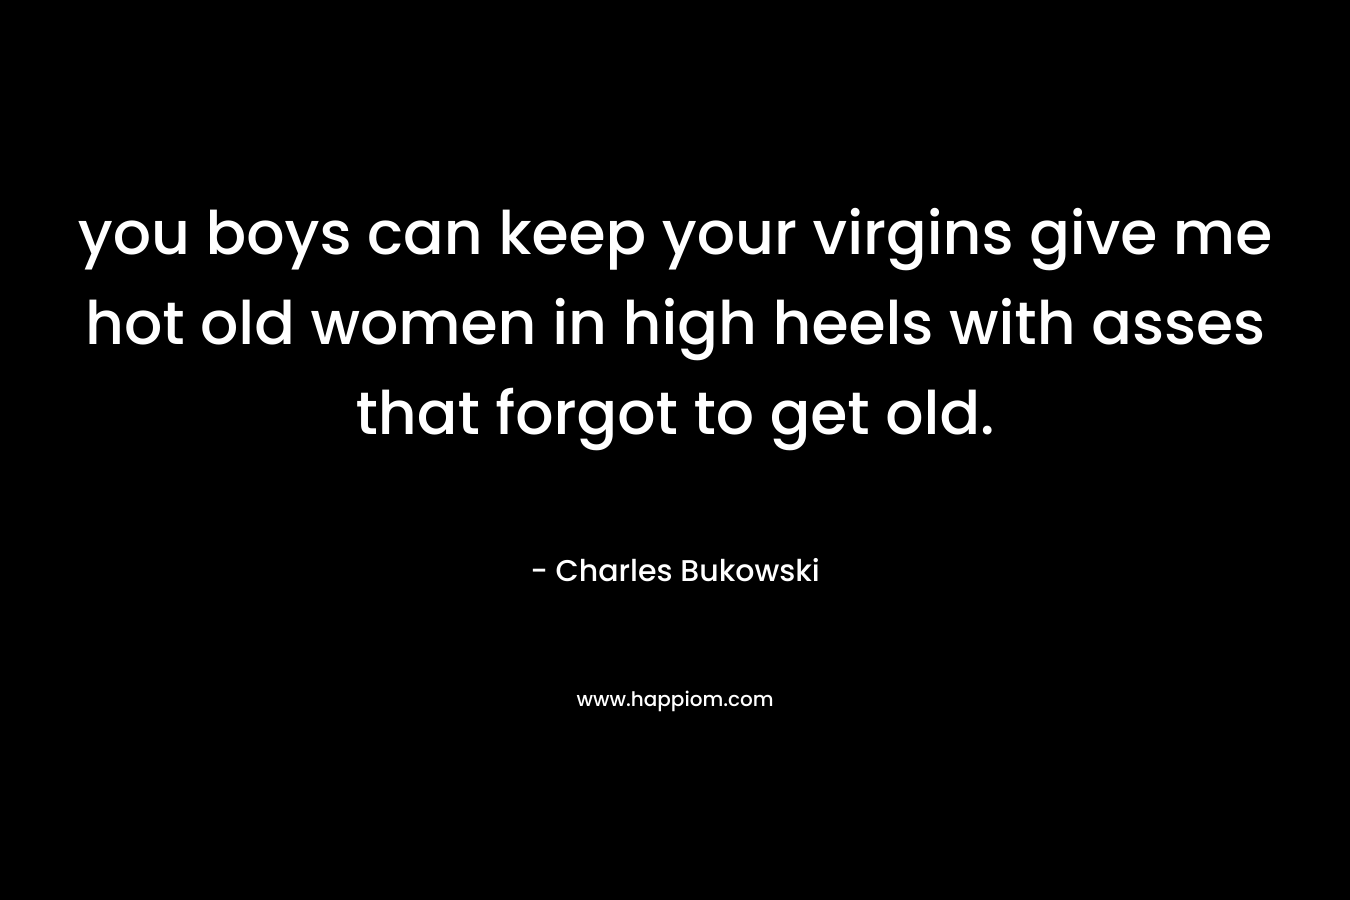 you boys can keep your virgins give me hot old women in high heels with asses that forgot to get old.